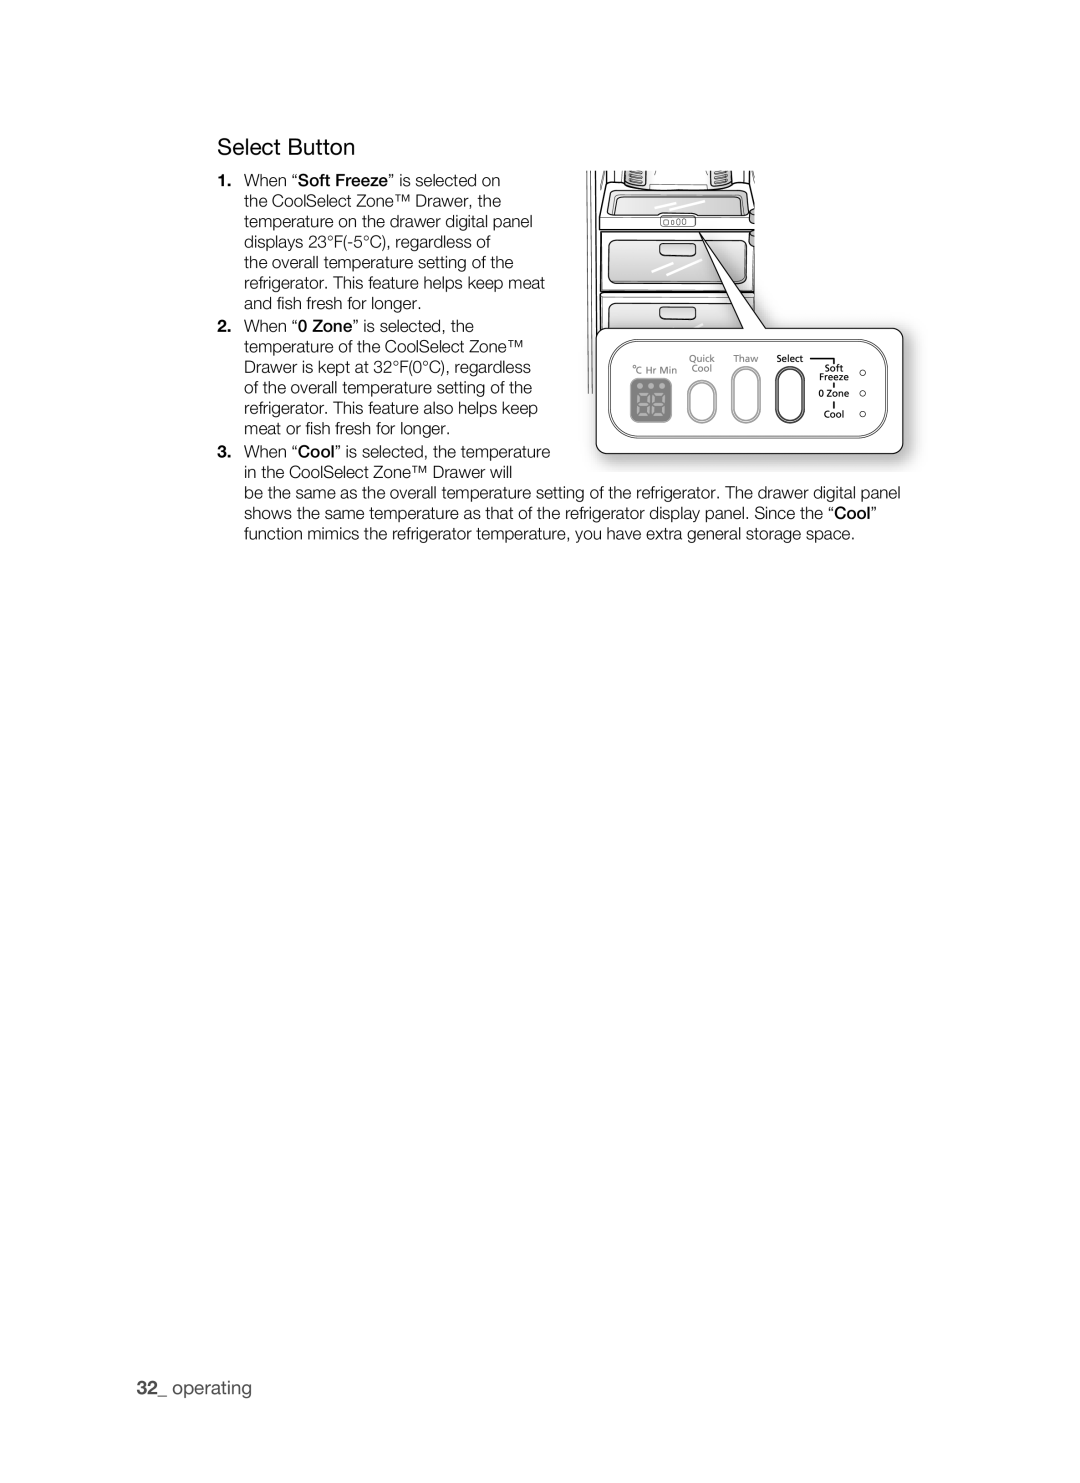 Samsung RSH1B, SRS610HDSS, RSH1K, RSH1J, RSH1N, RSH1D, RSH1F user manual Select Button, operating 